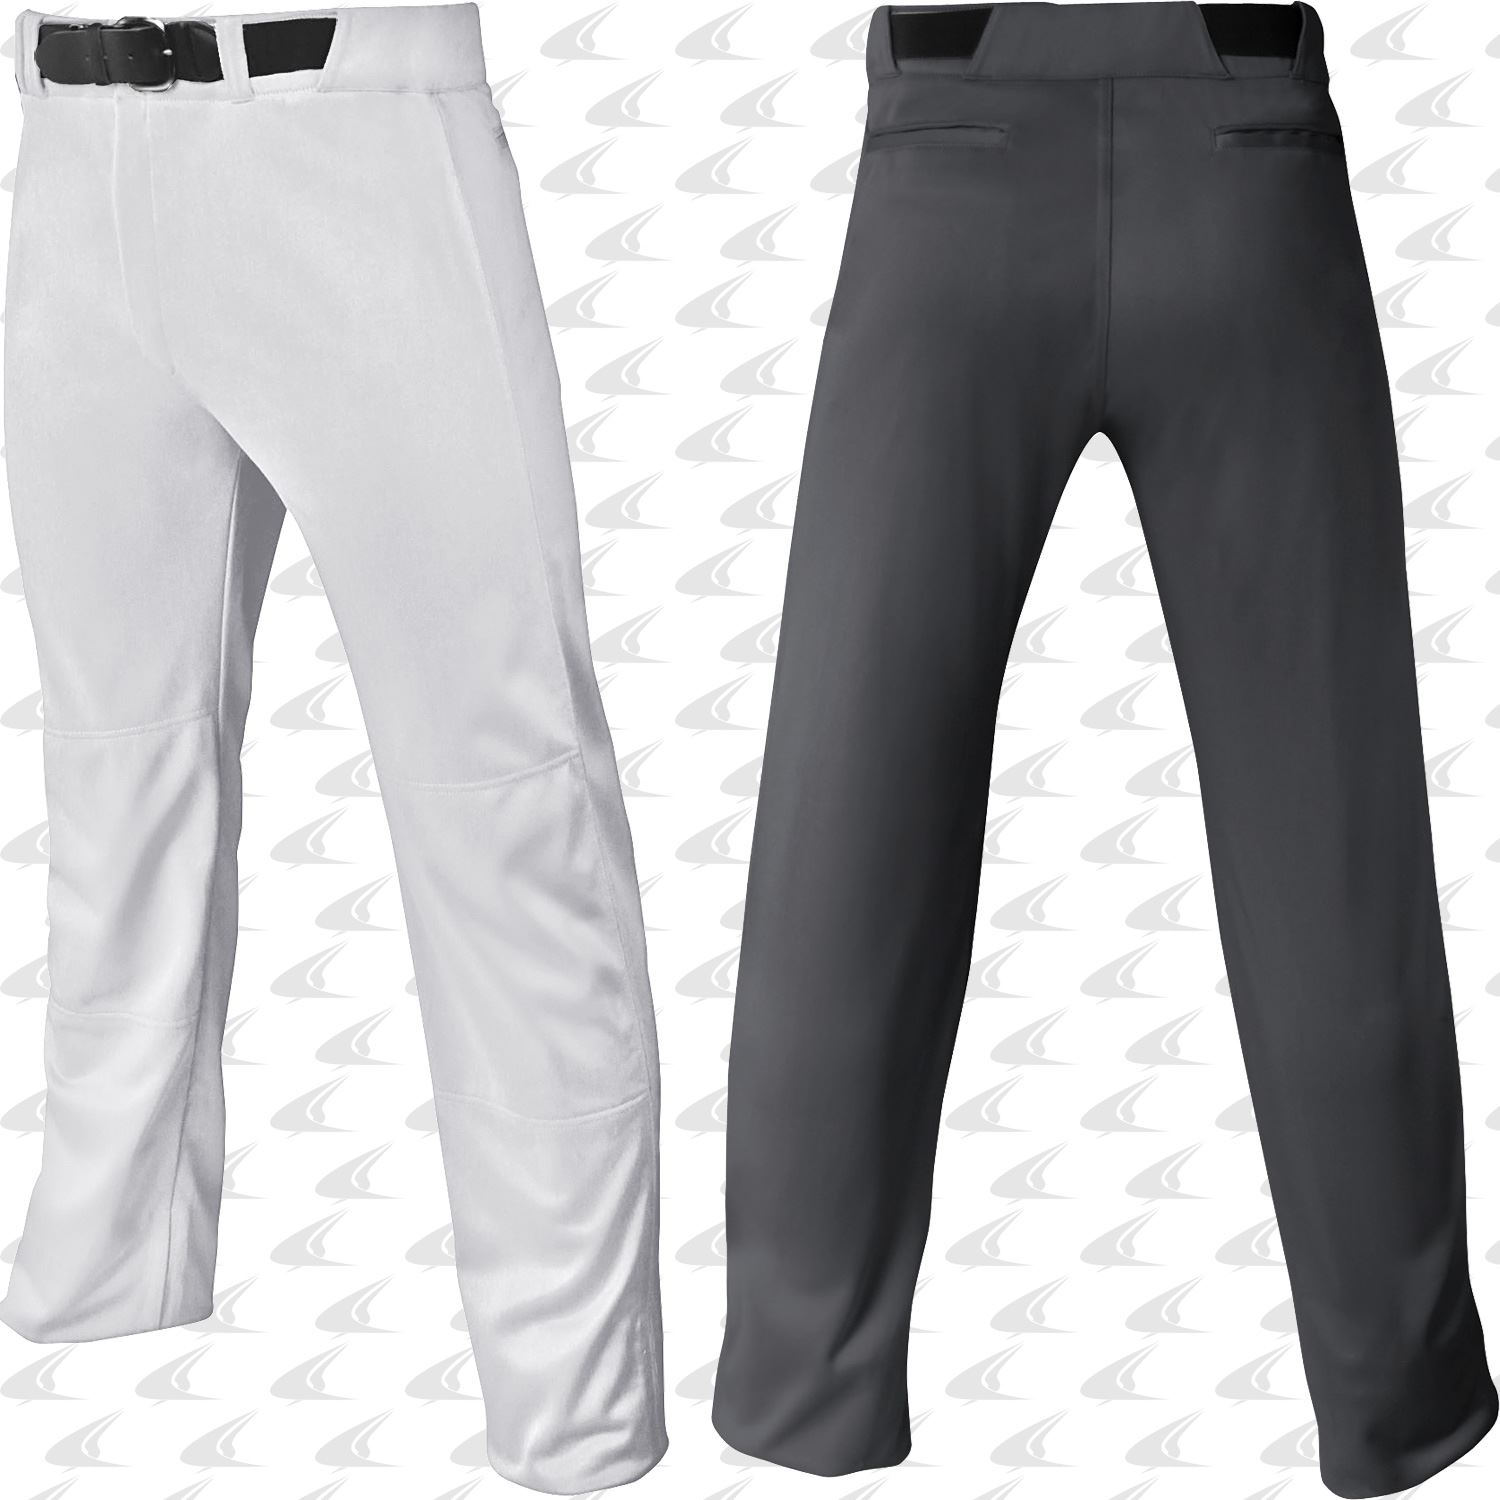 BP4AWXL Champro NU Classic Adult Baseball Pants White Extra Large for sale online 